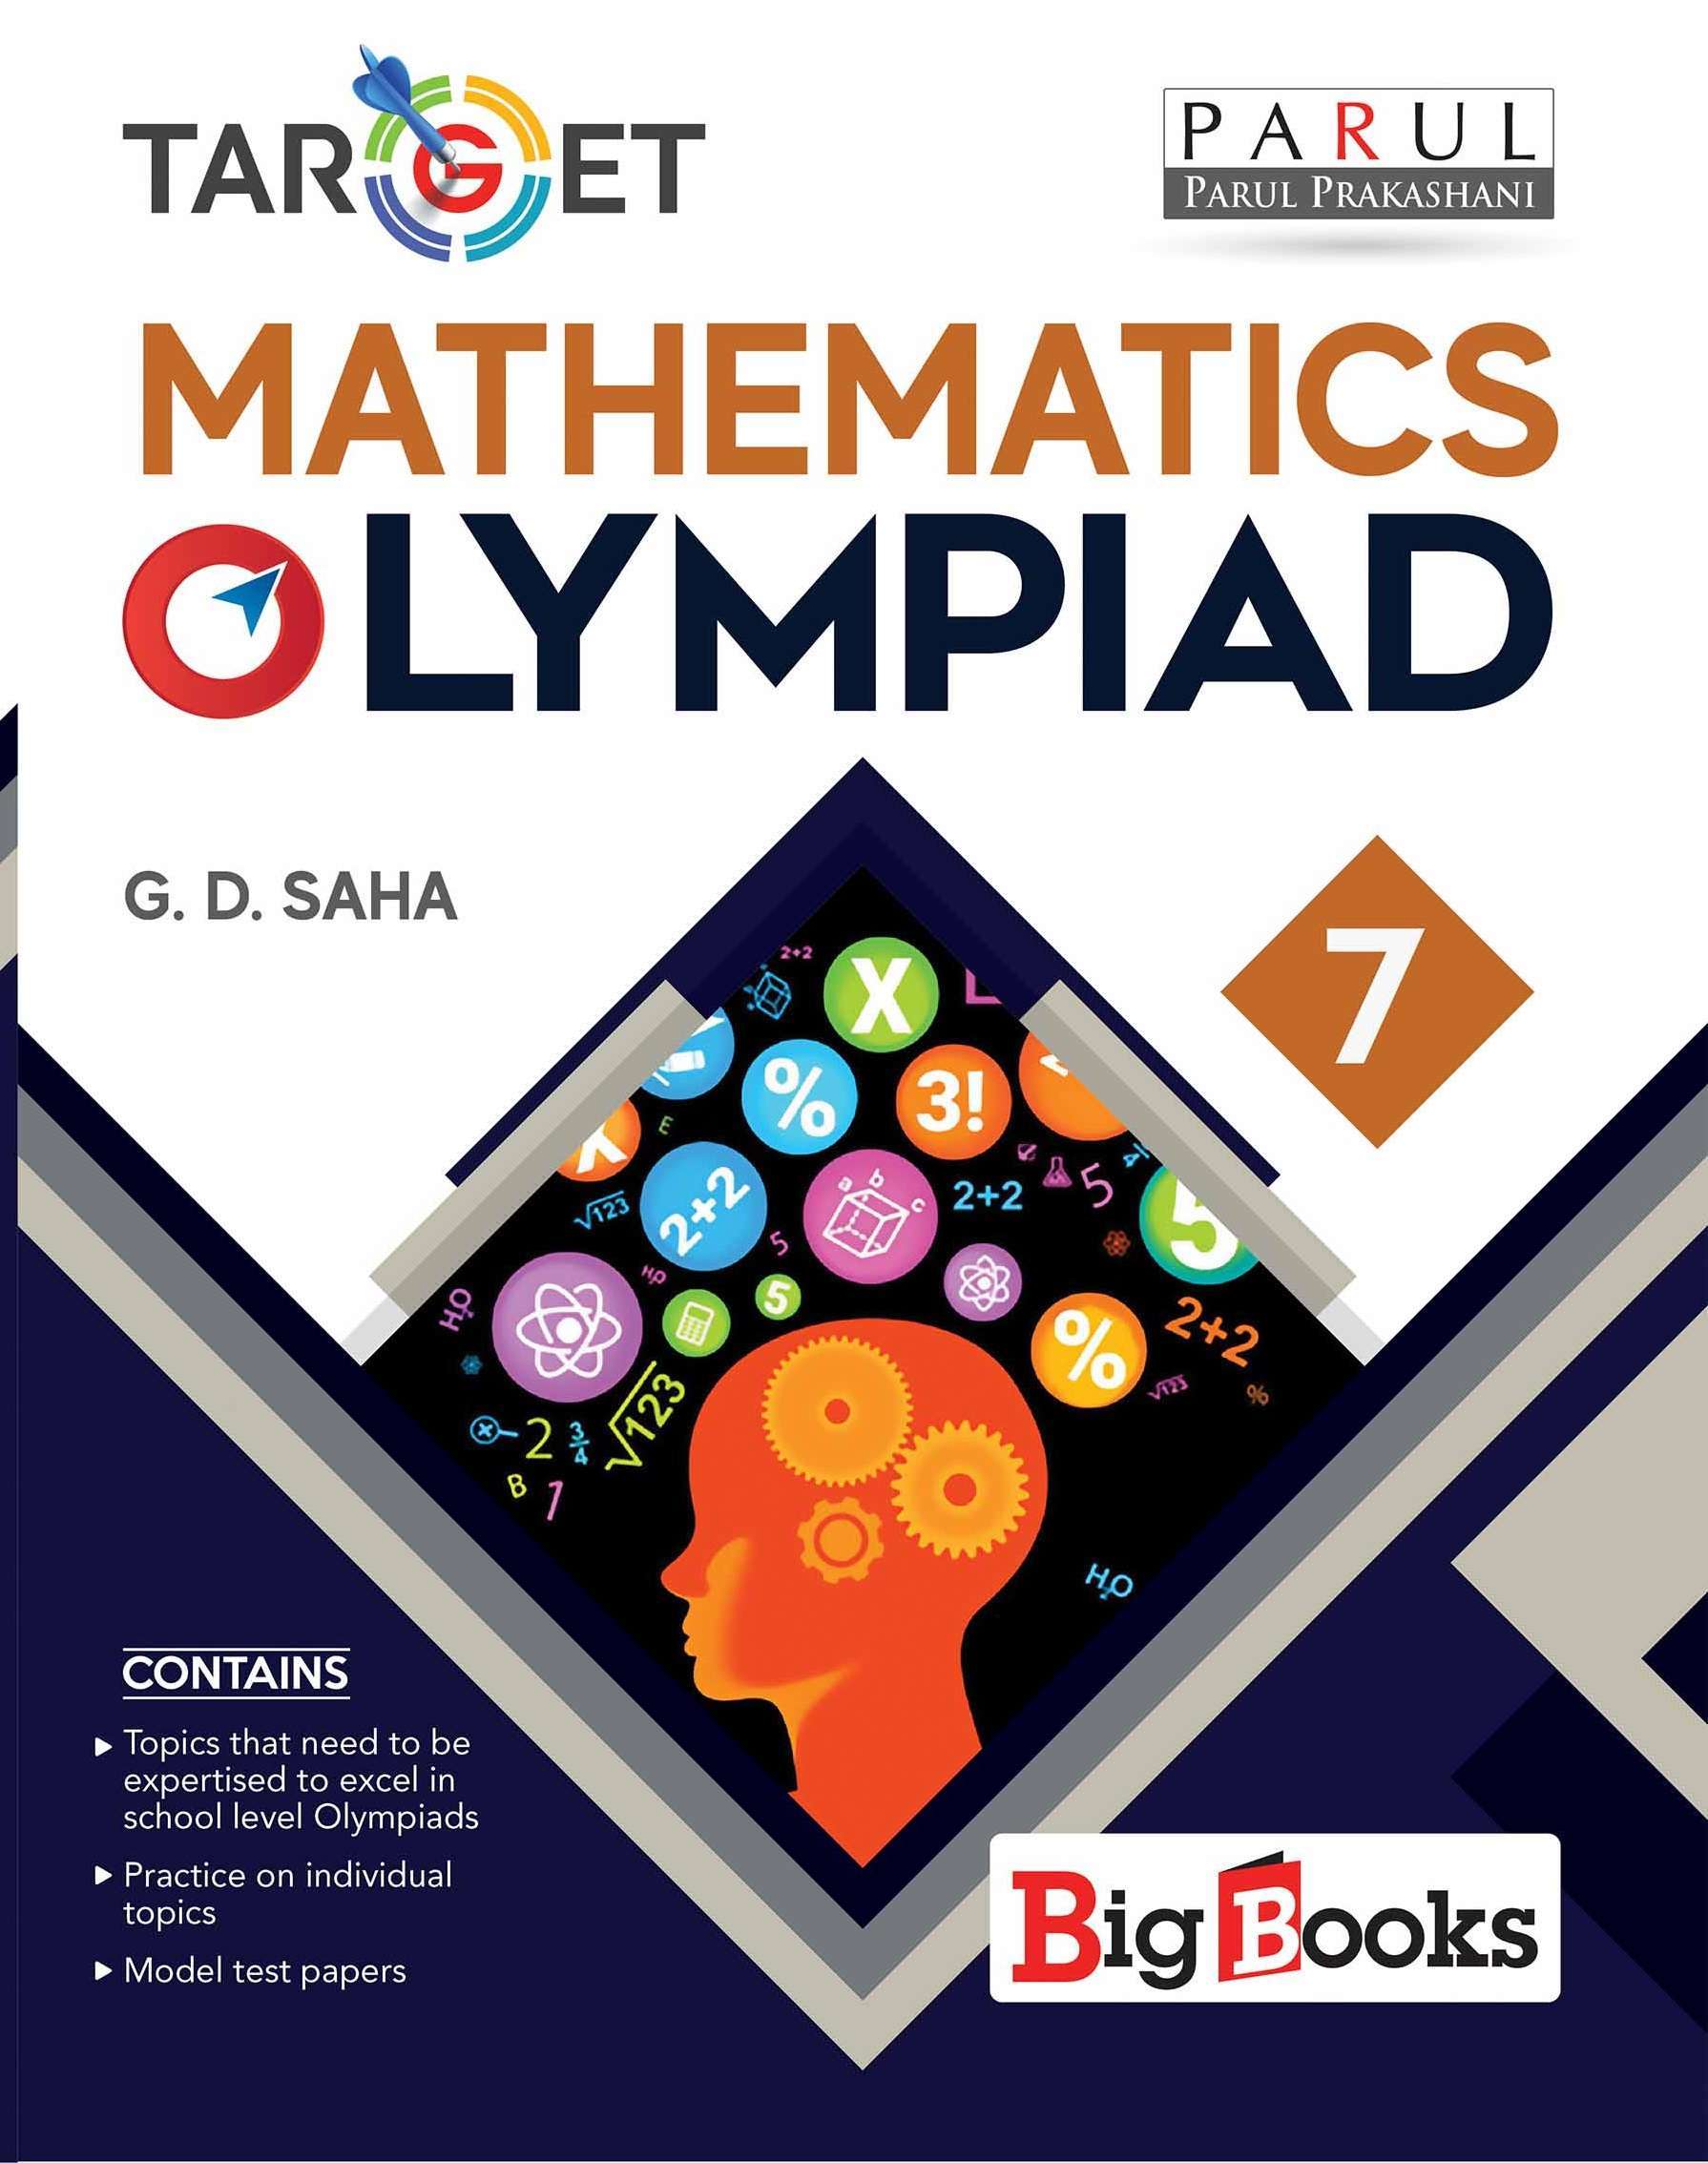 Buy Mathematics Olympiad book for 7